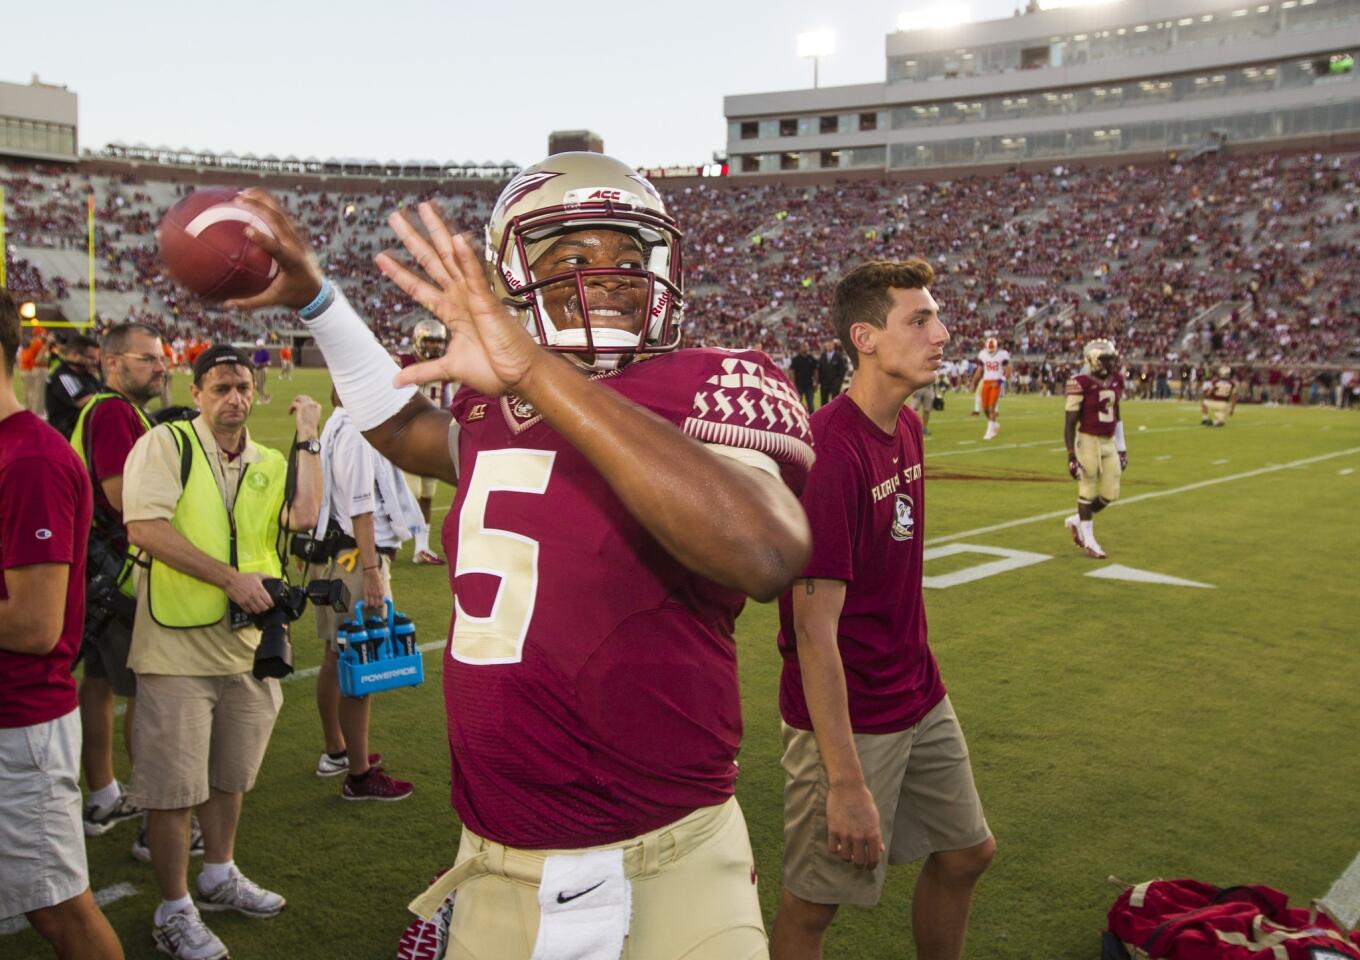 Florida State quarterback Jameis Winston warms up without a care Sept. 20 before the Clemson game ... a game in which he was not allowed to play.